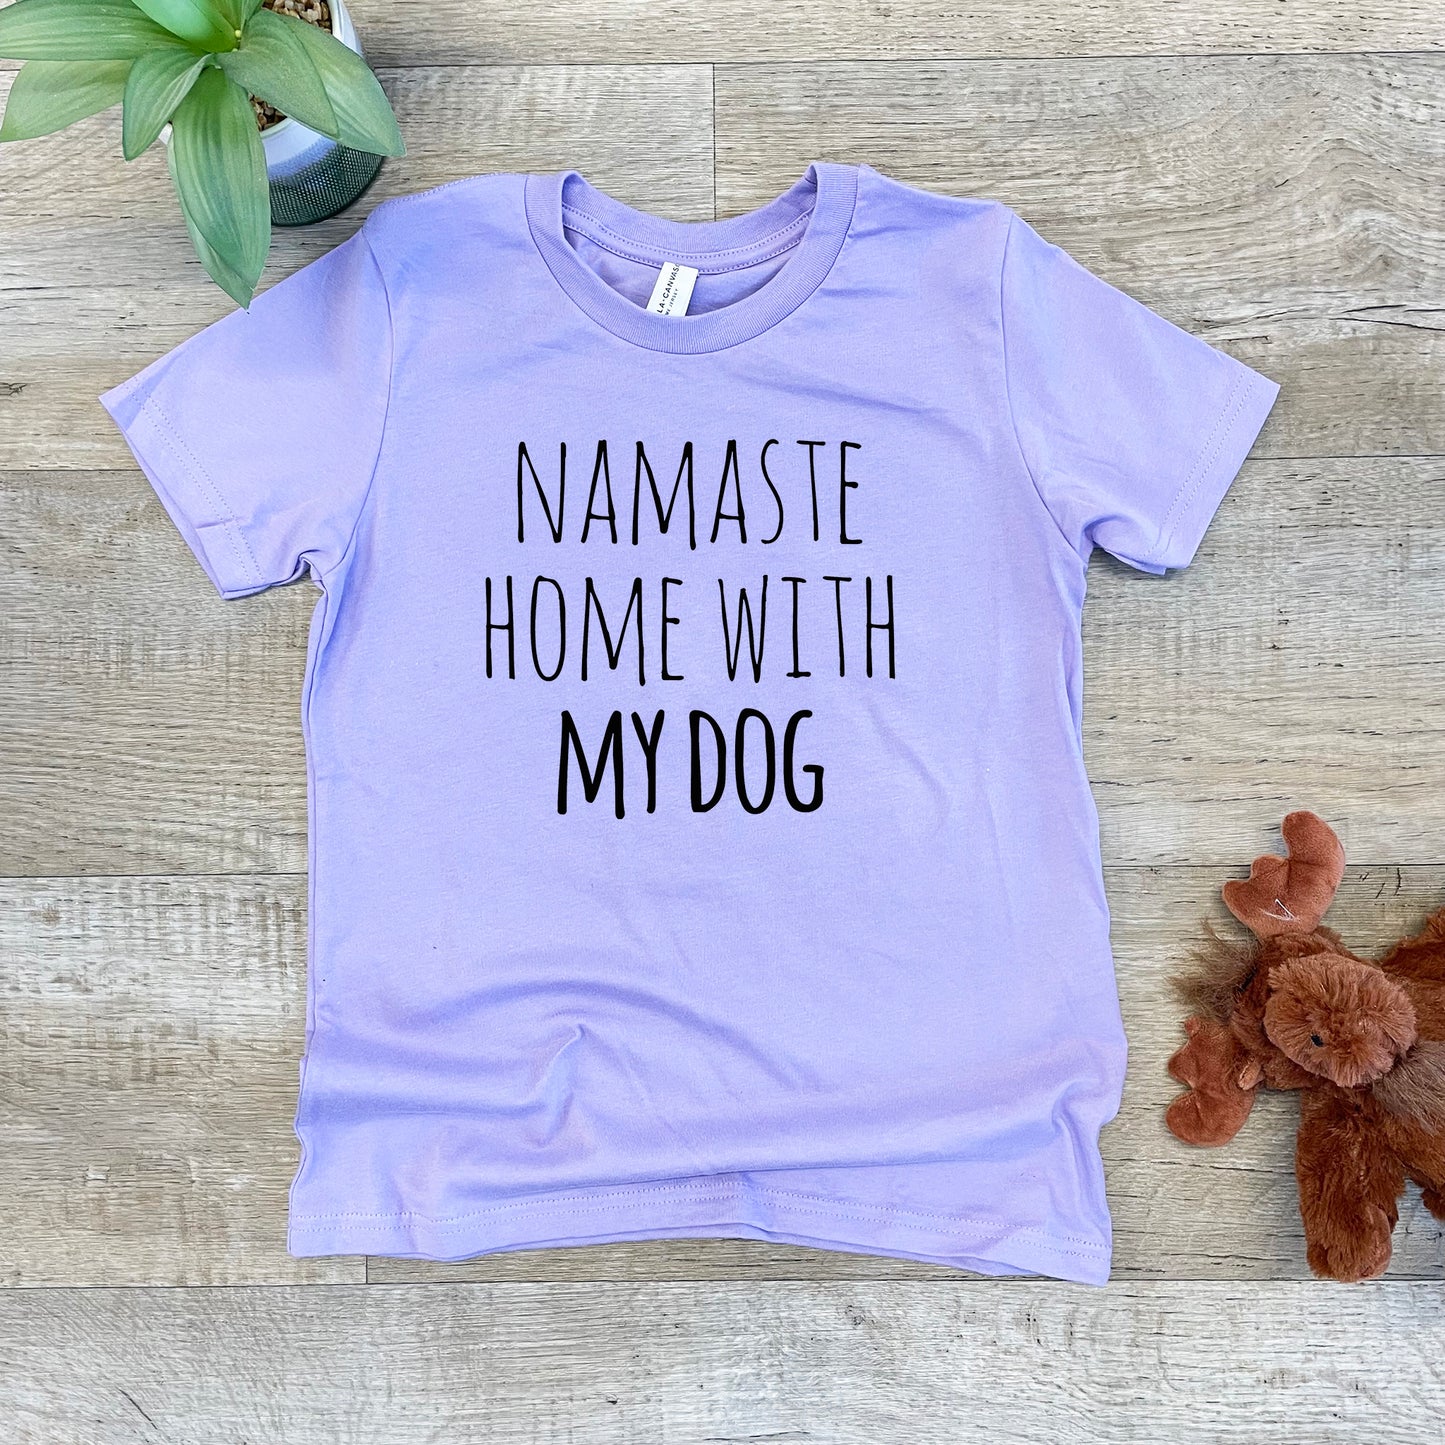 Namaste Home With My Dog - Kid's Tee - Columbia Blue or Lavender